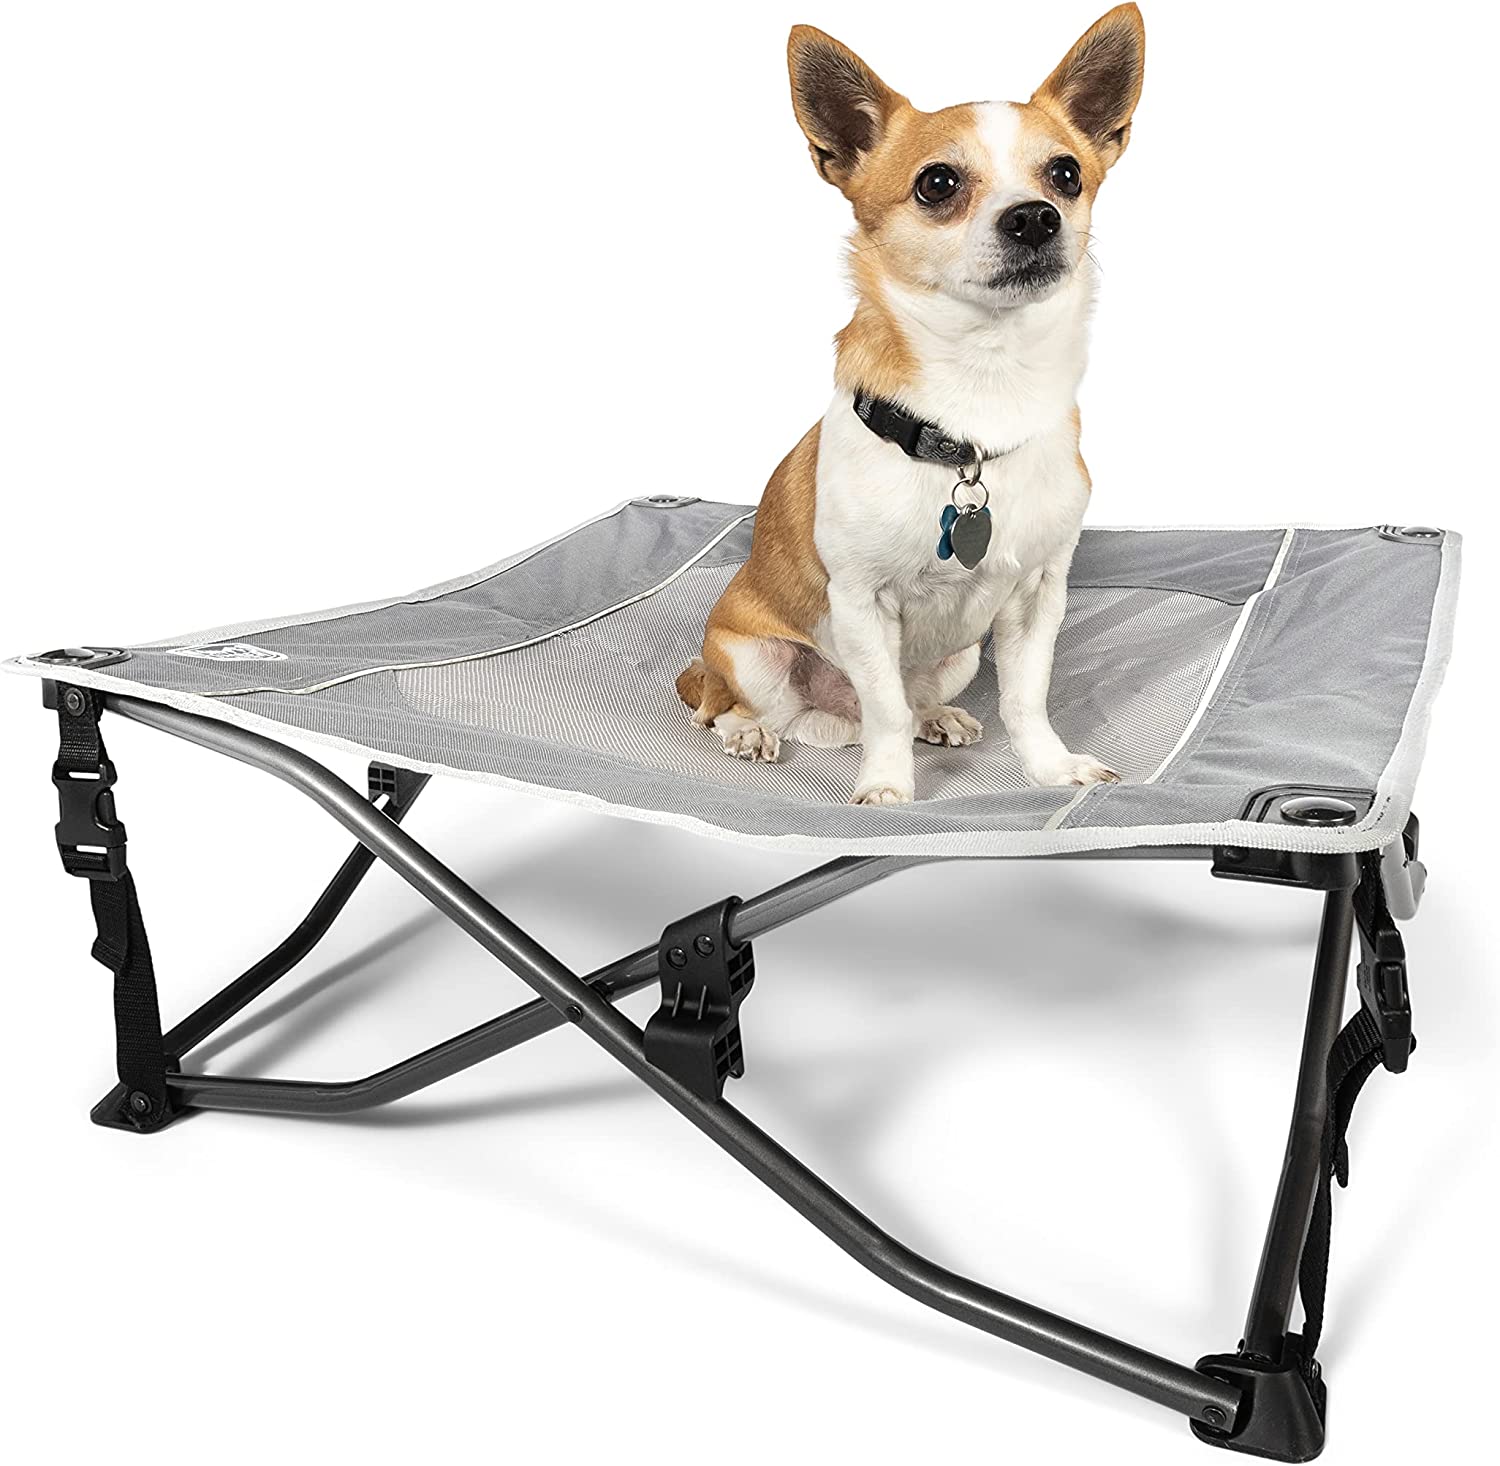 TIMBER RIDGE Breathable Mesh Elevated Dog Bed